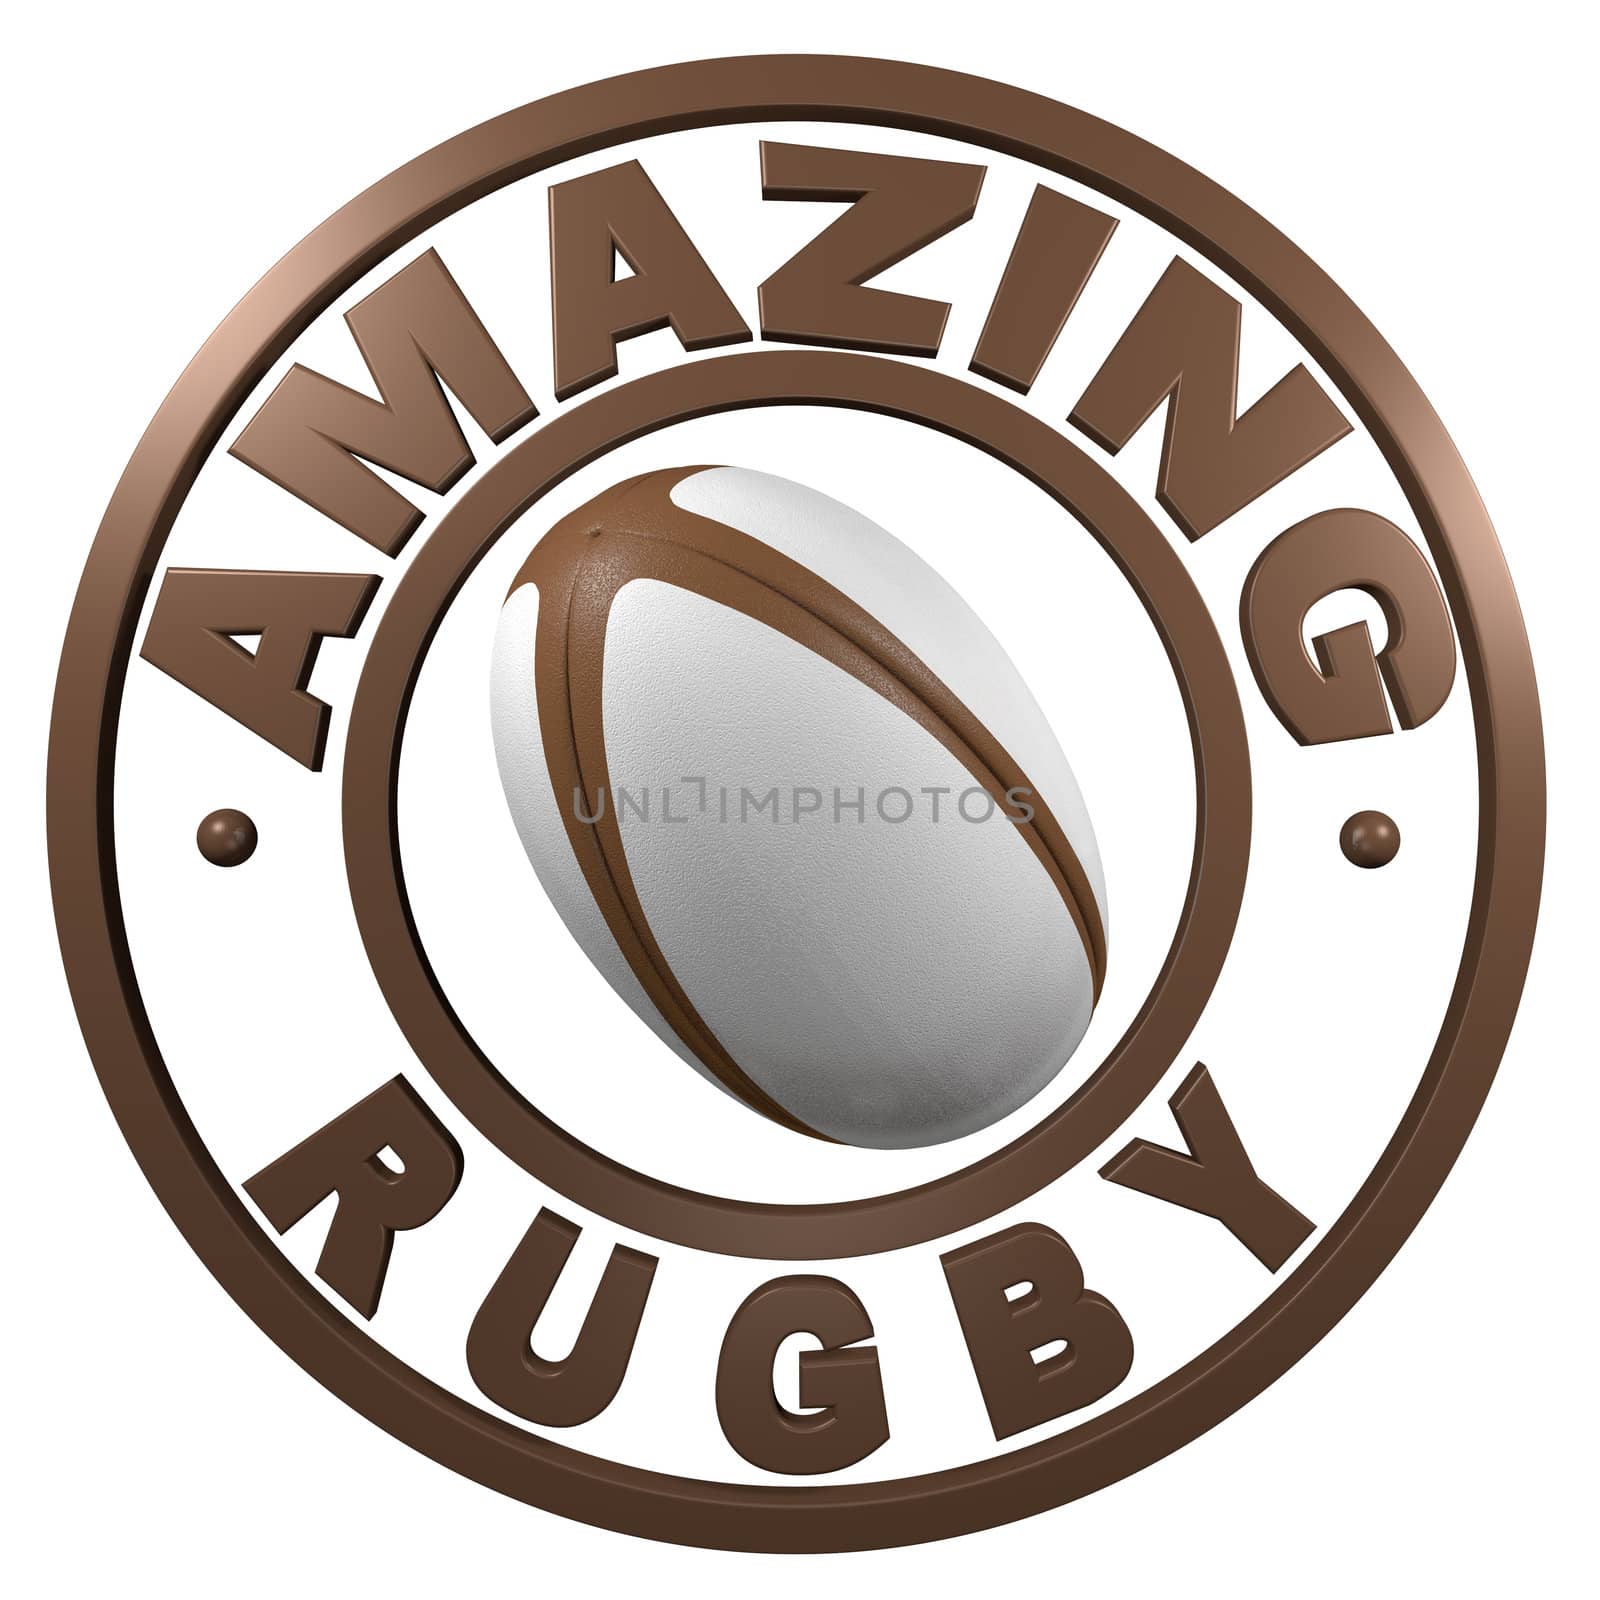 Amazing Rugby circular design with a white background